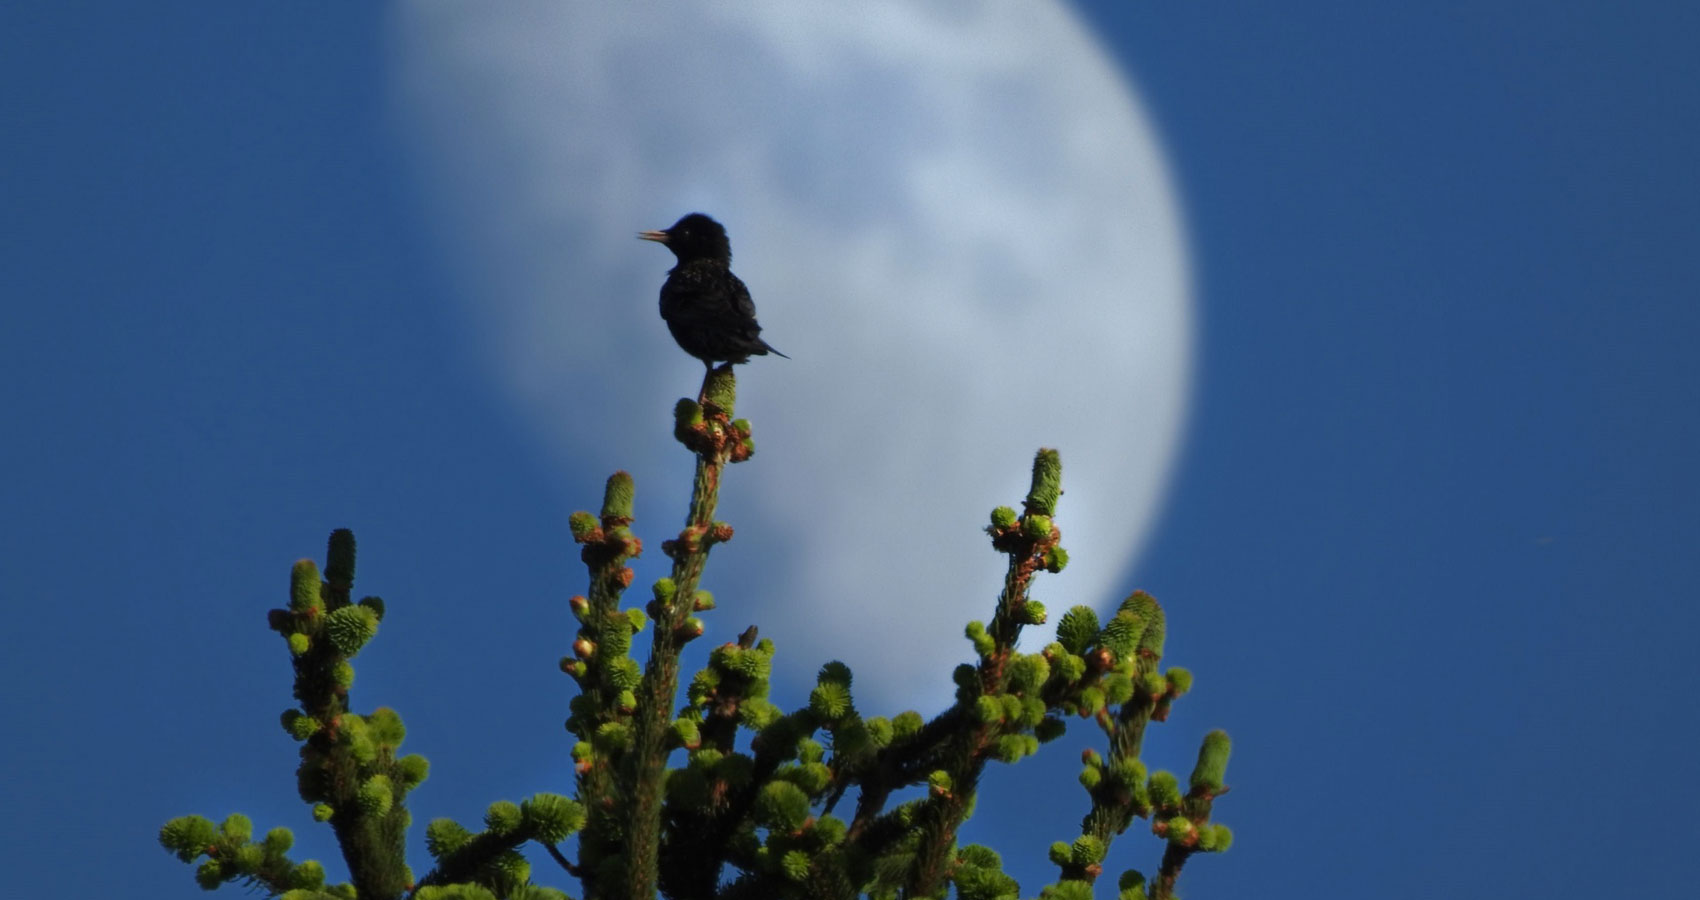 Under The Spring Moon, poetry written by LadyLily at Spillwords.com